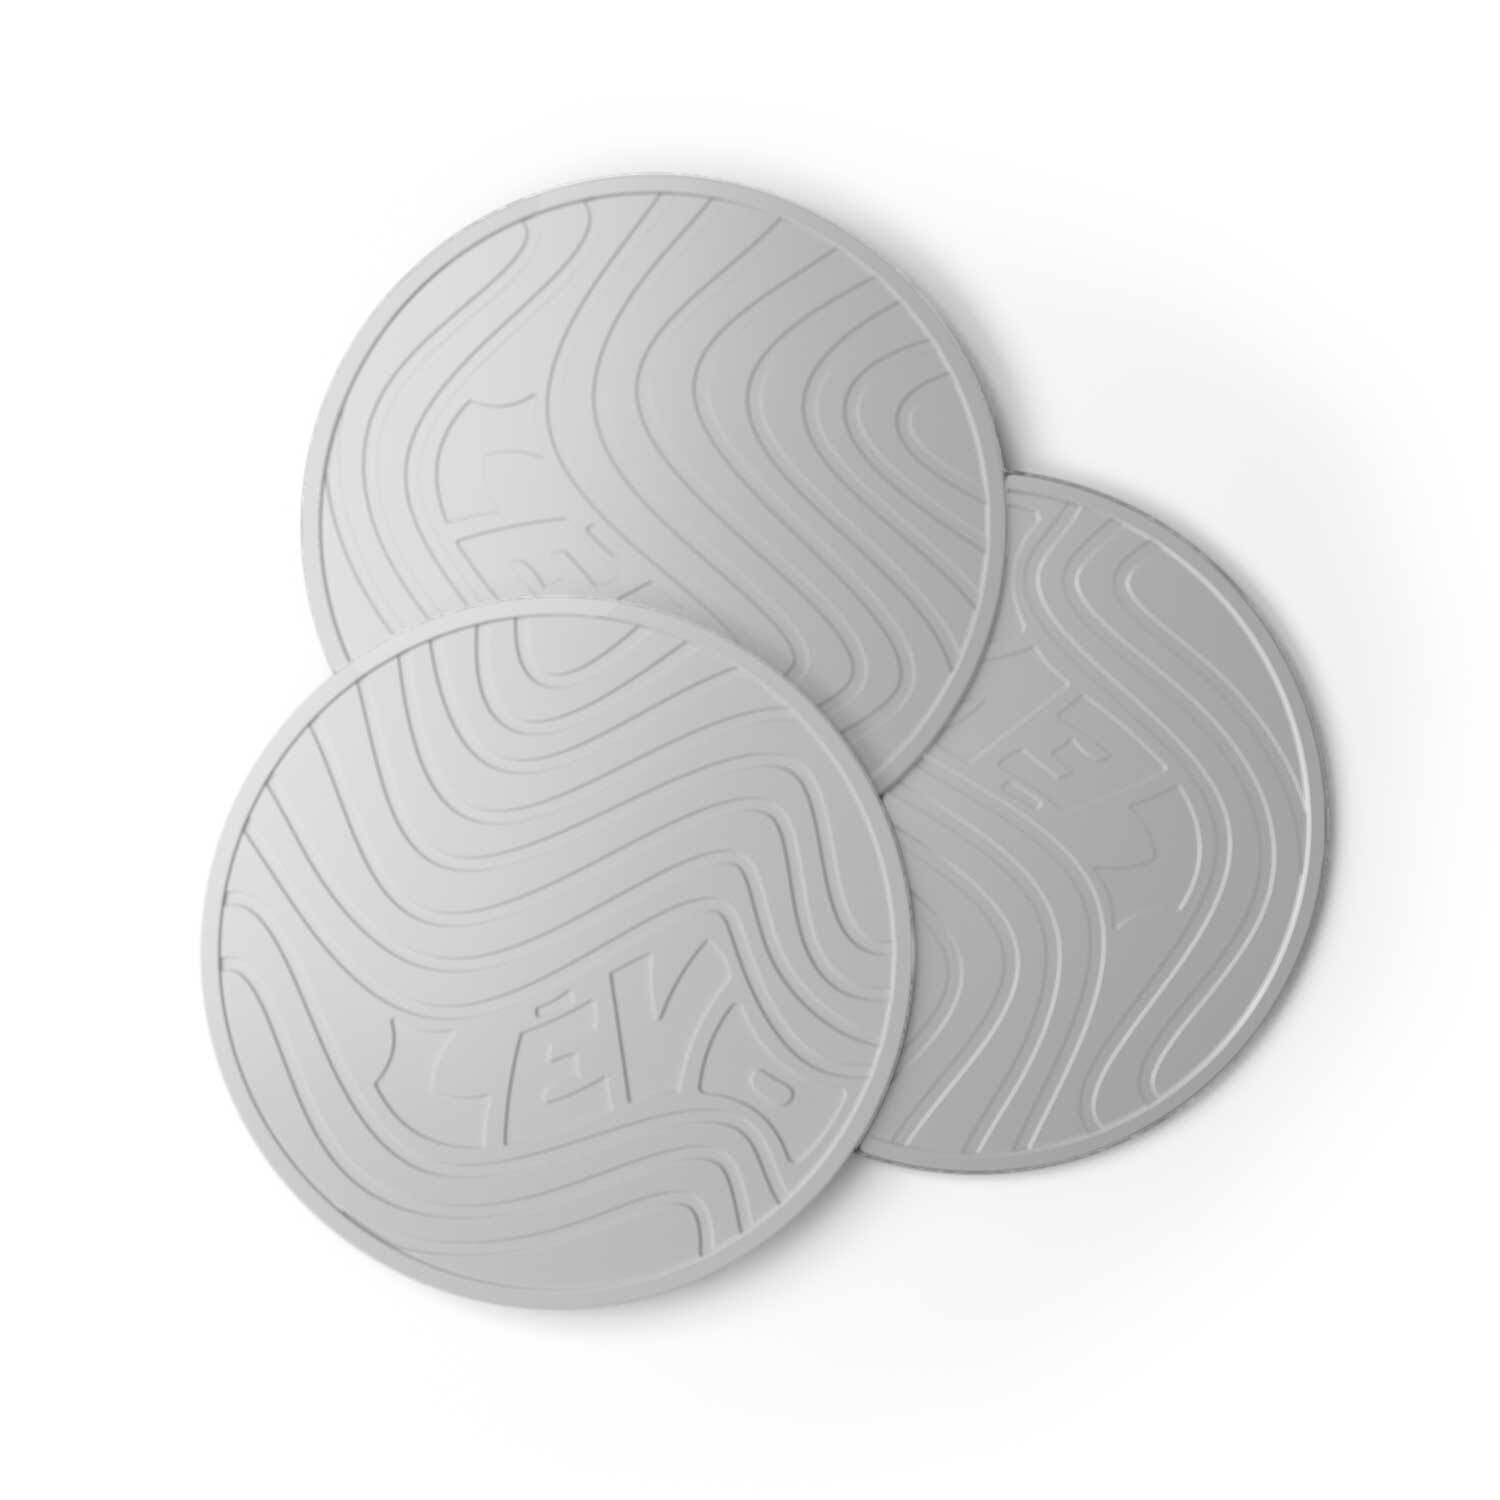 LĒVO Silicone Trivets in grey, 3 pack.